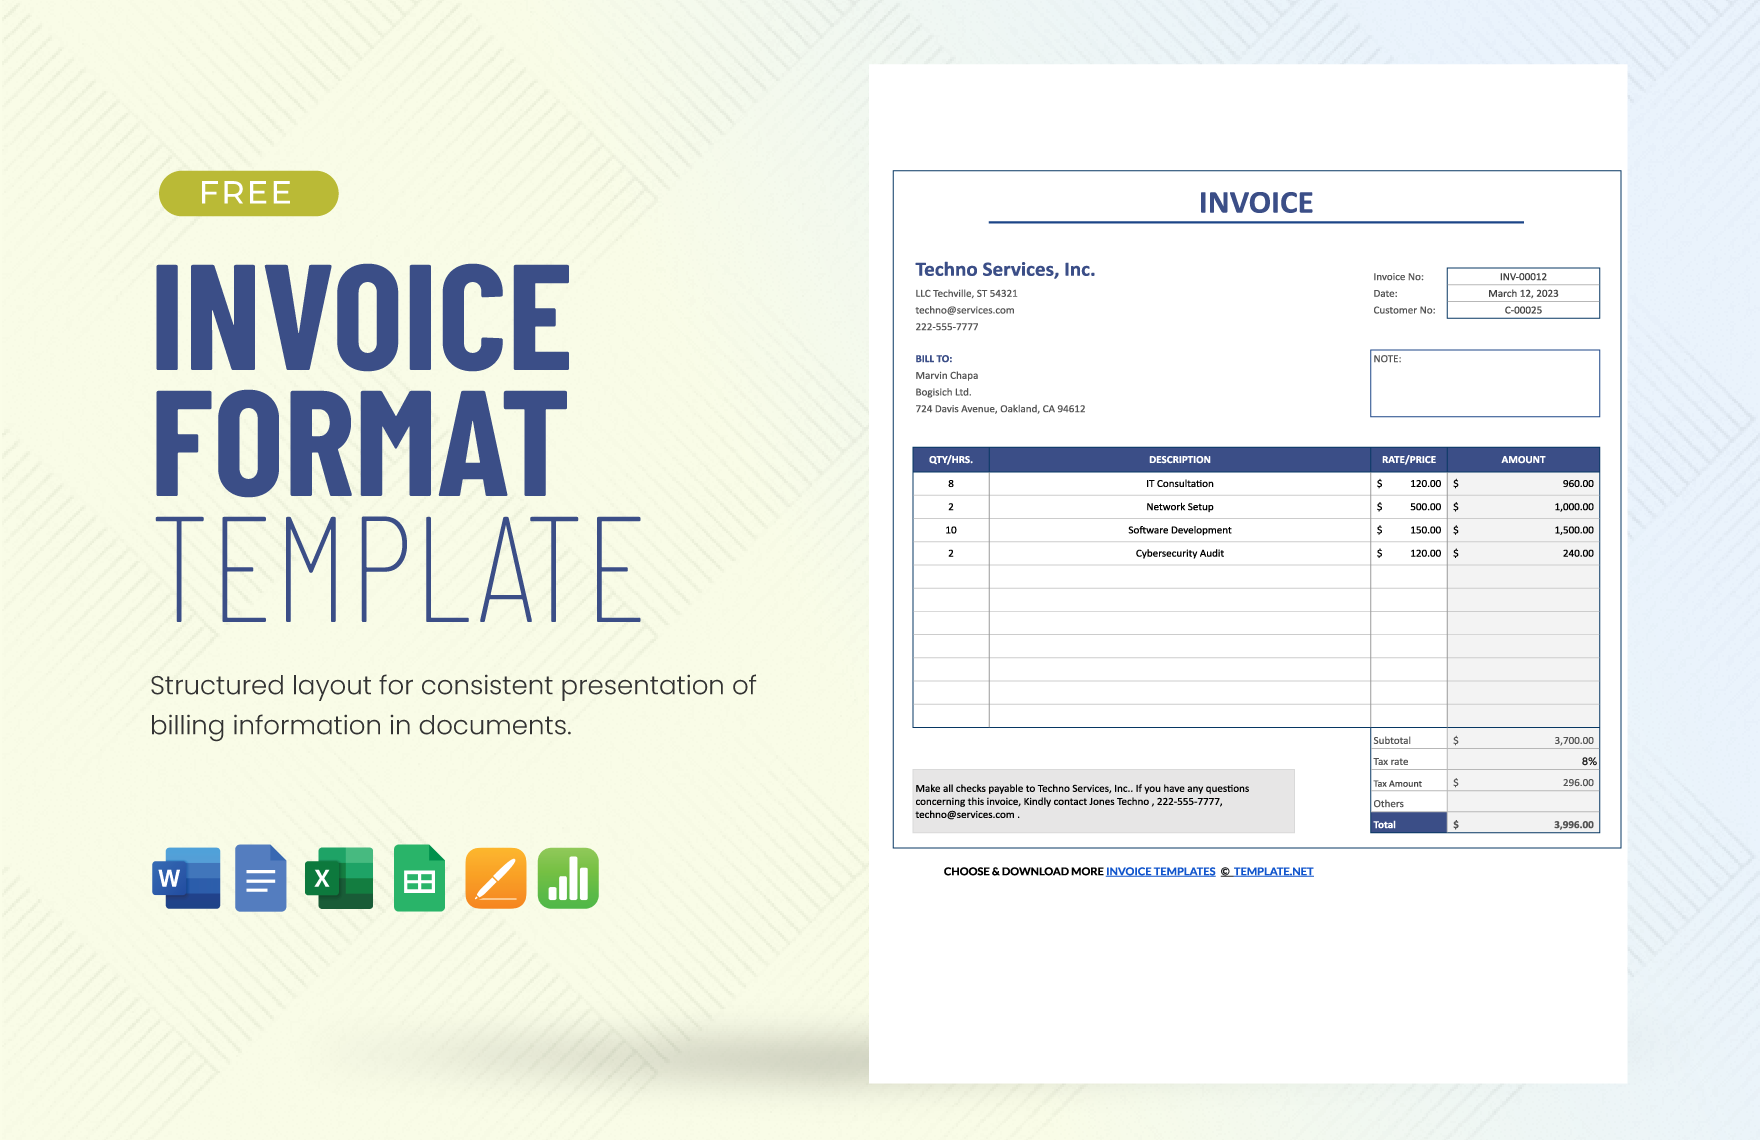 Invoice Format Template in Word, Google Docs, Excel, Google Sheets, Apple Pages, Apple Numbers